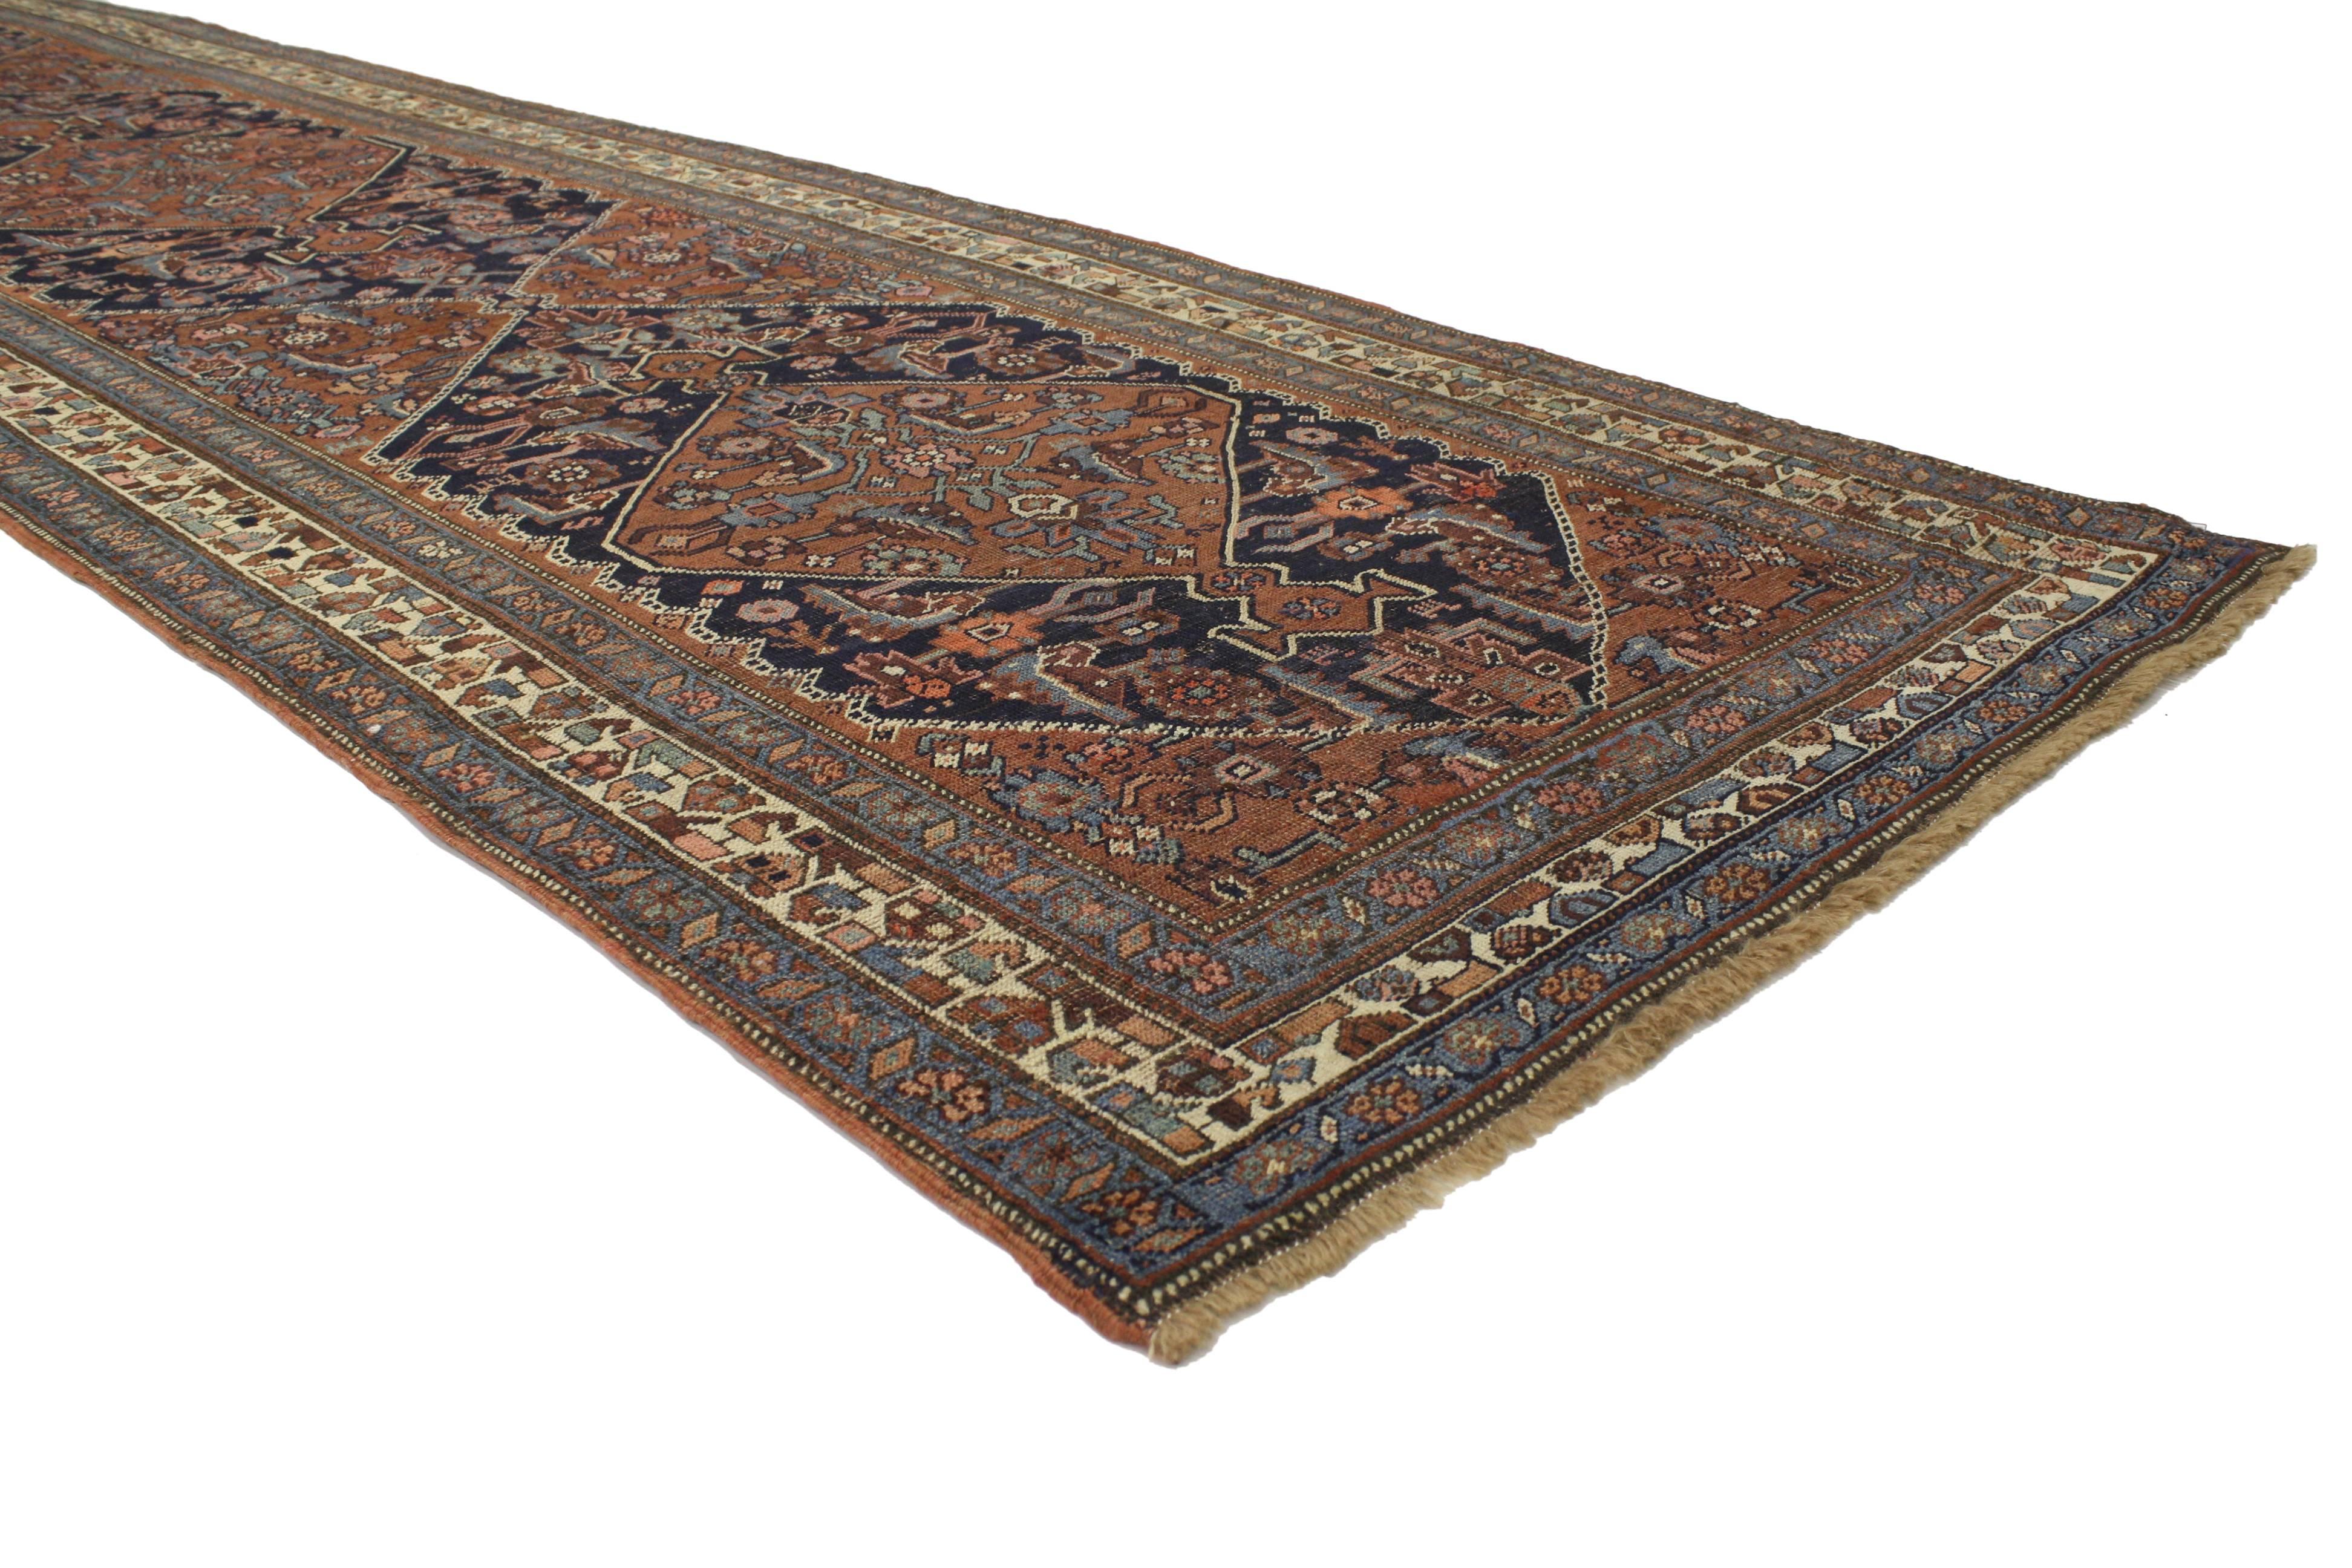 76653 antique Persian Kurdish Bidjar Runner with Rustic Luxe Art Deco Style. Dignified with bespoke style, this hand-knotted wool antique Persian Kurdish Bidjar runner features large-scale navy blue cartouches, each with a hexagonal medallion filled